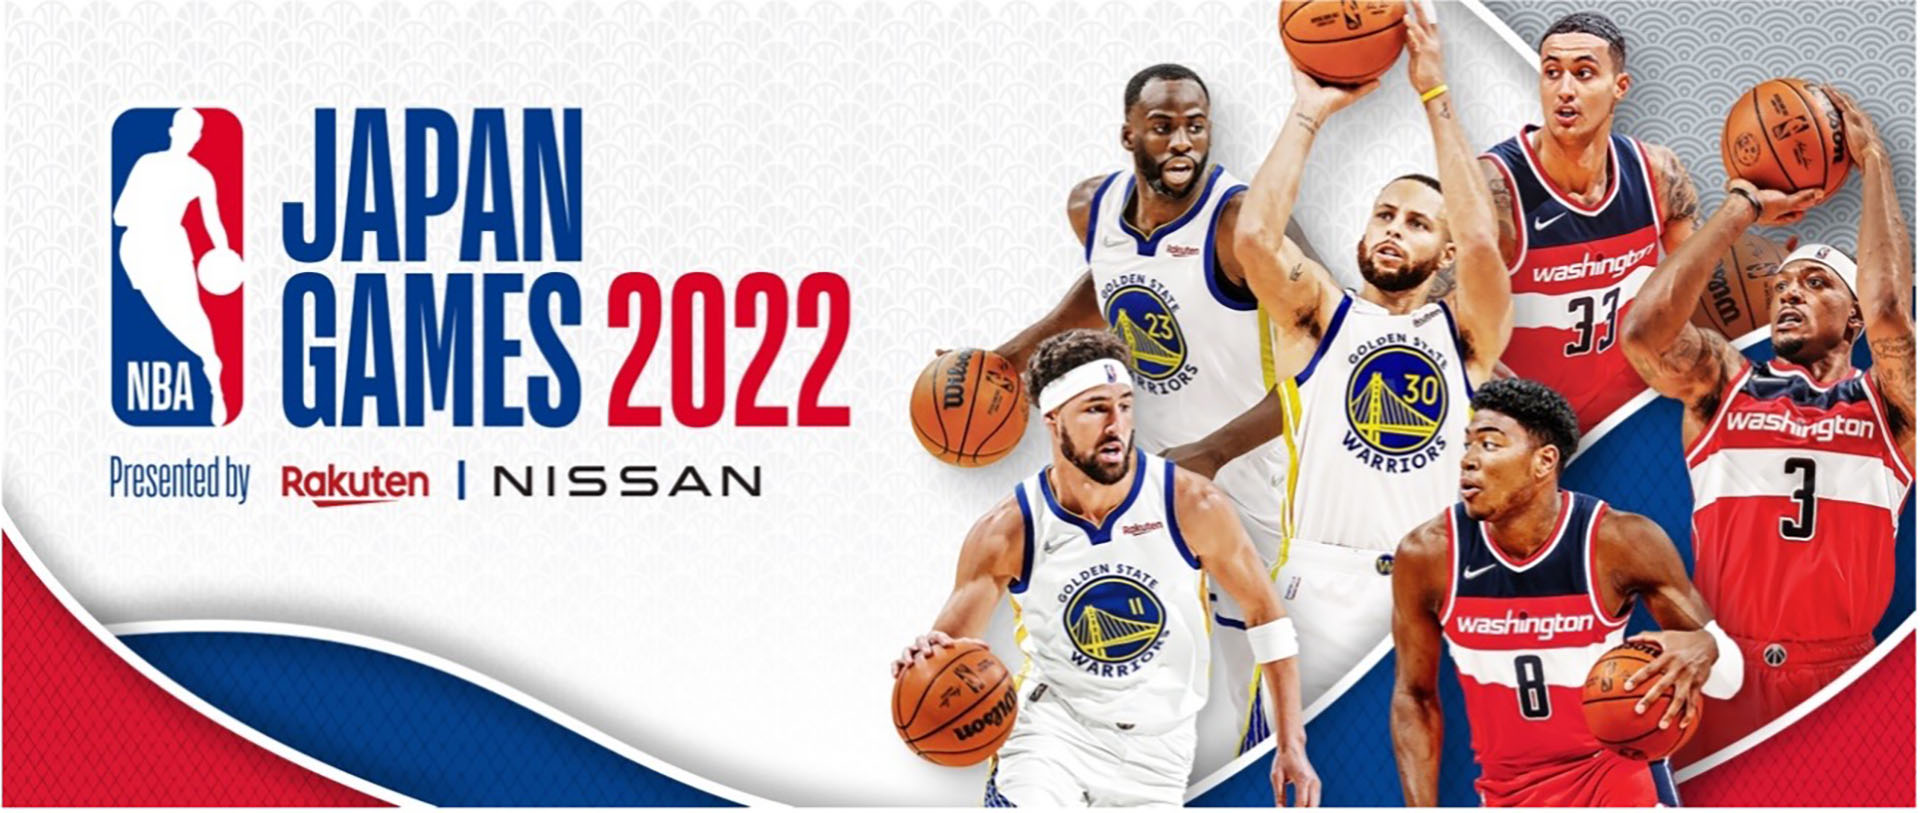 NBA Japan Games 2022 ファンブックが数量限定販売！ ｜ FLY 